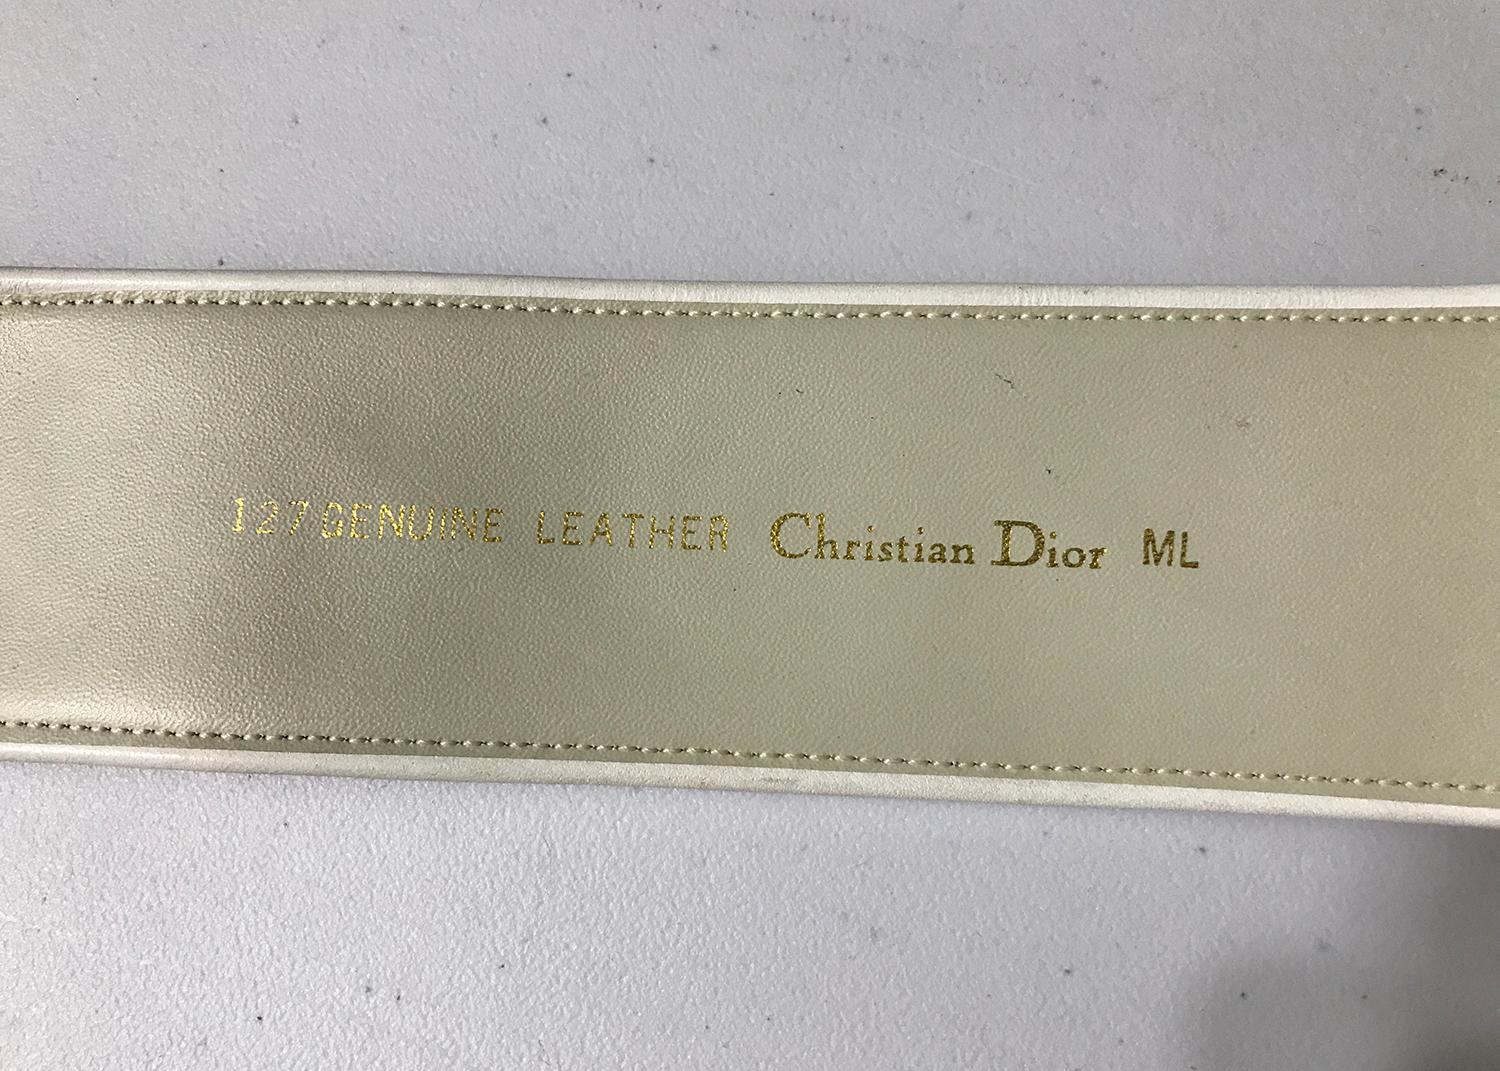  Christian Dior White & Golden Yellow Cord Applique Wide Leather Belt M-L 1990s For Sale 5